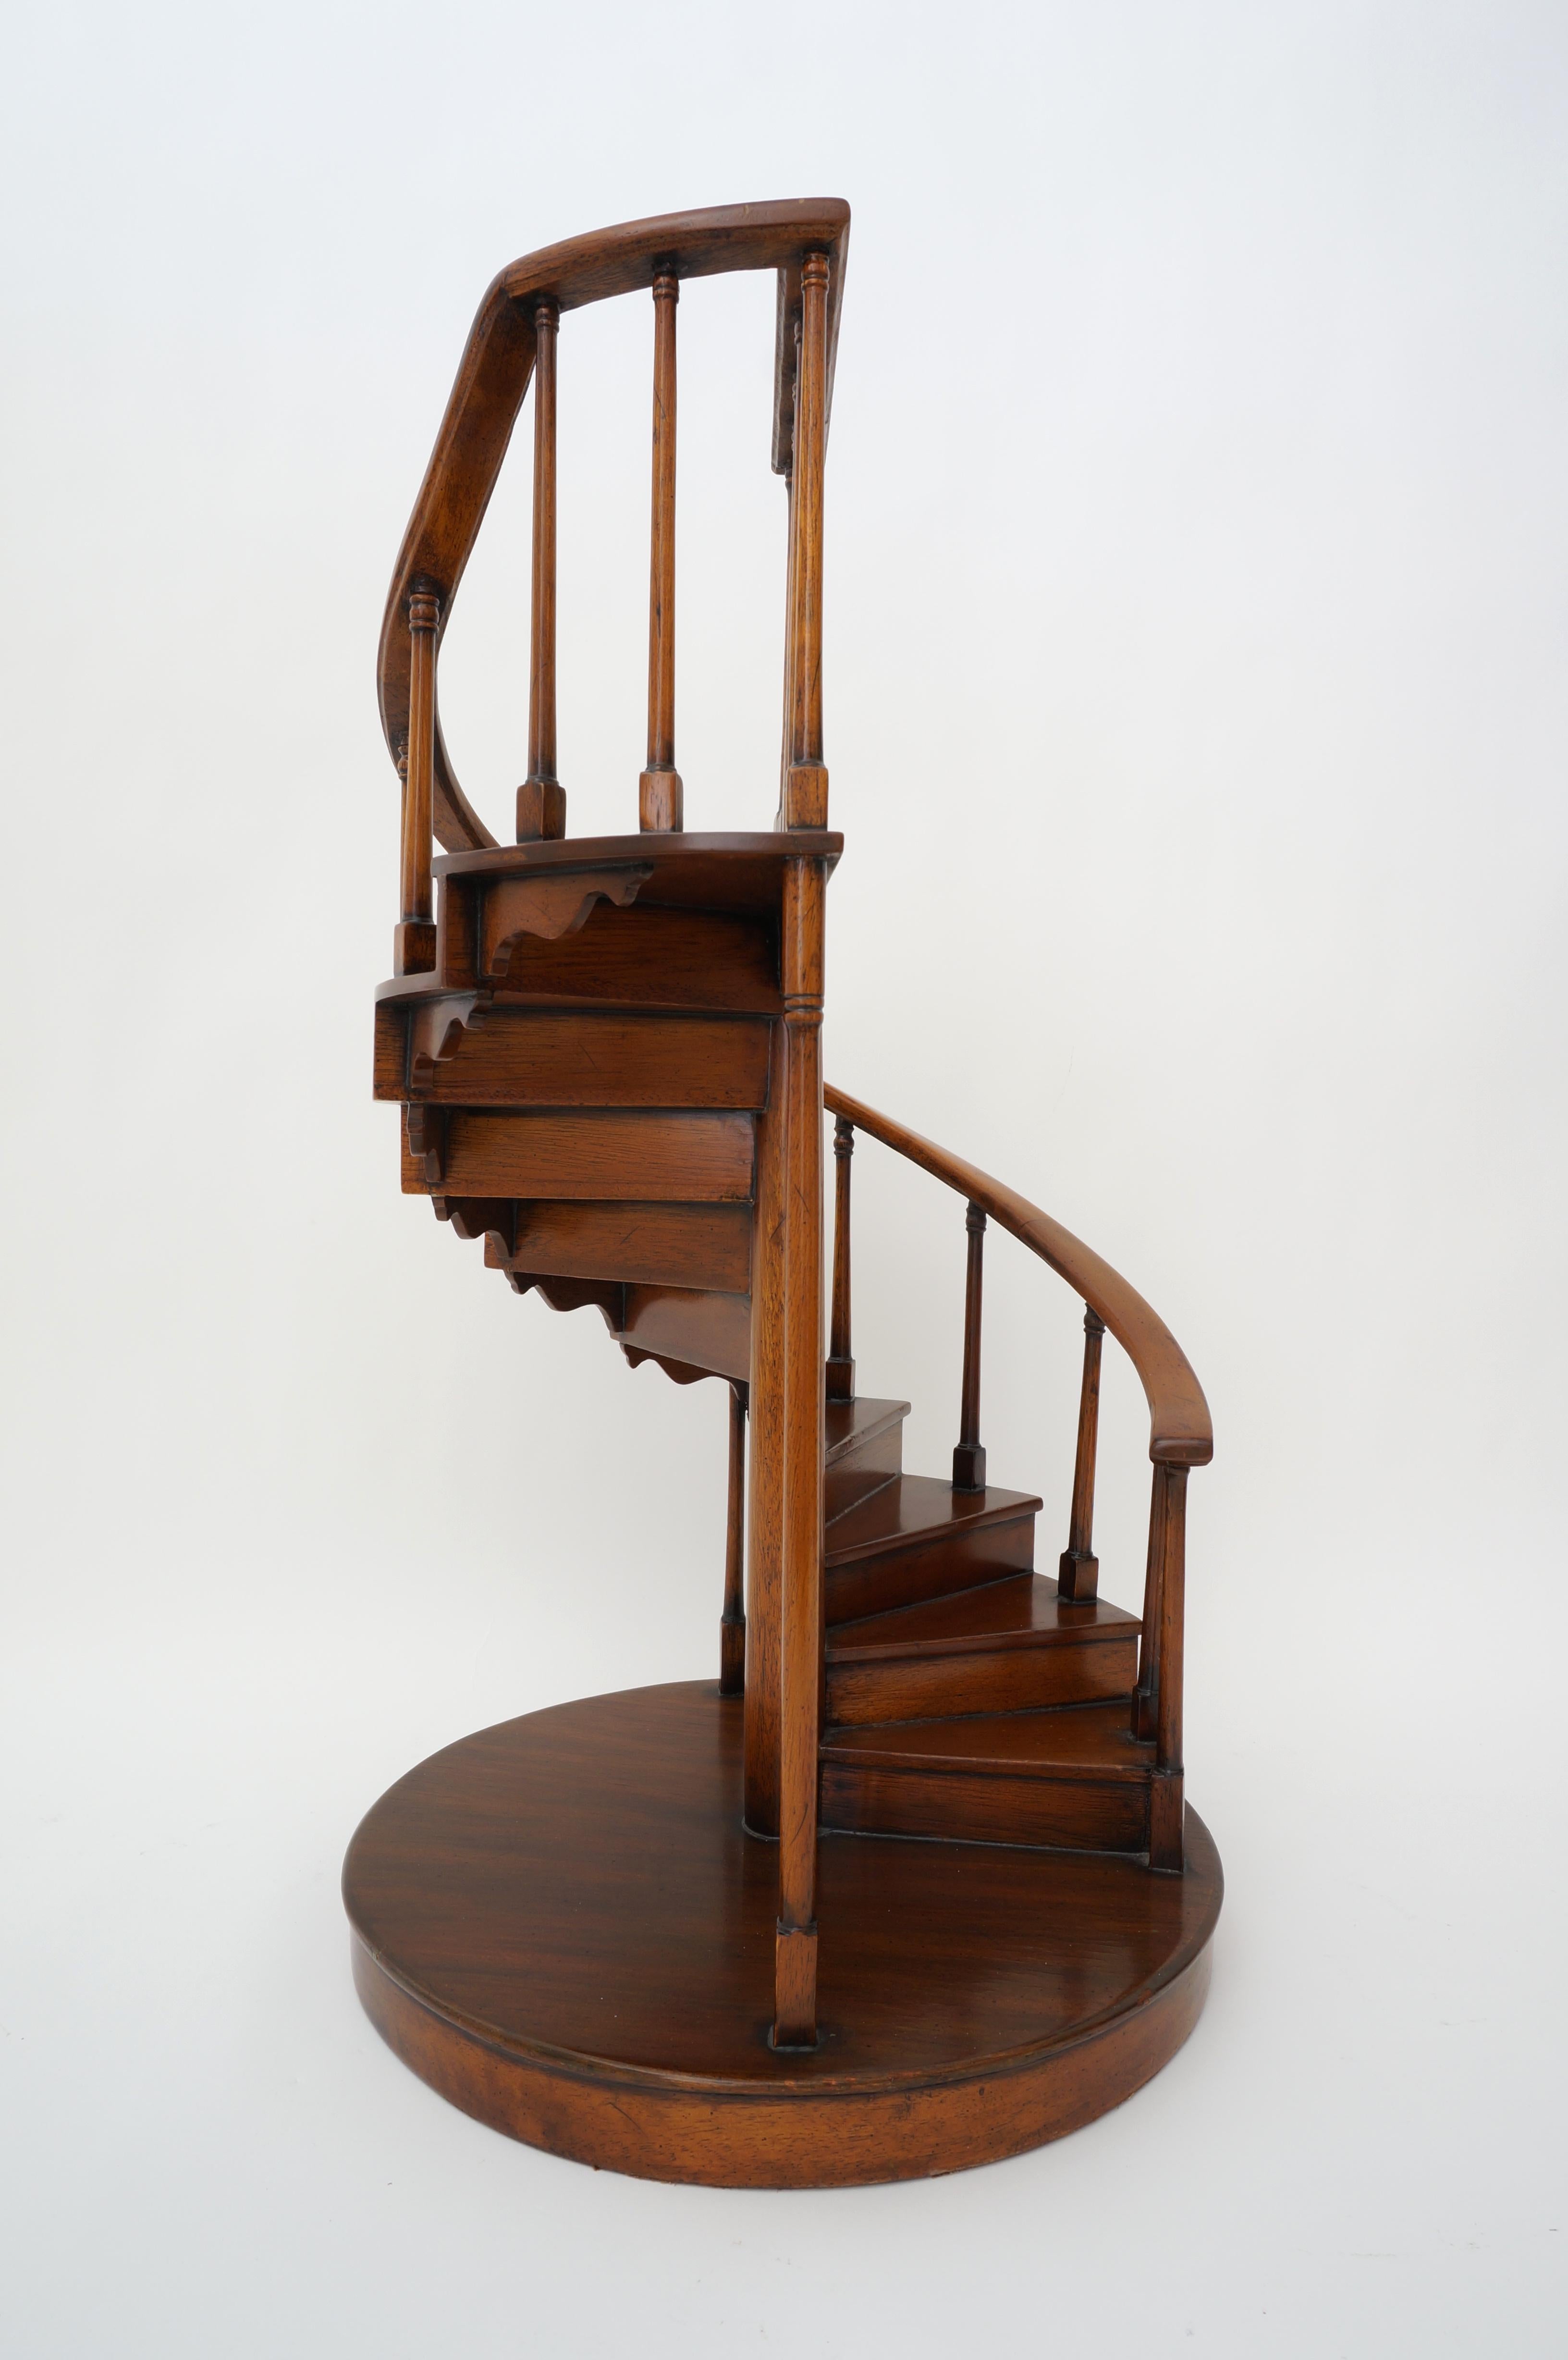 Organic Modern Spiral Staircase Architectural Model in Mahogany